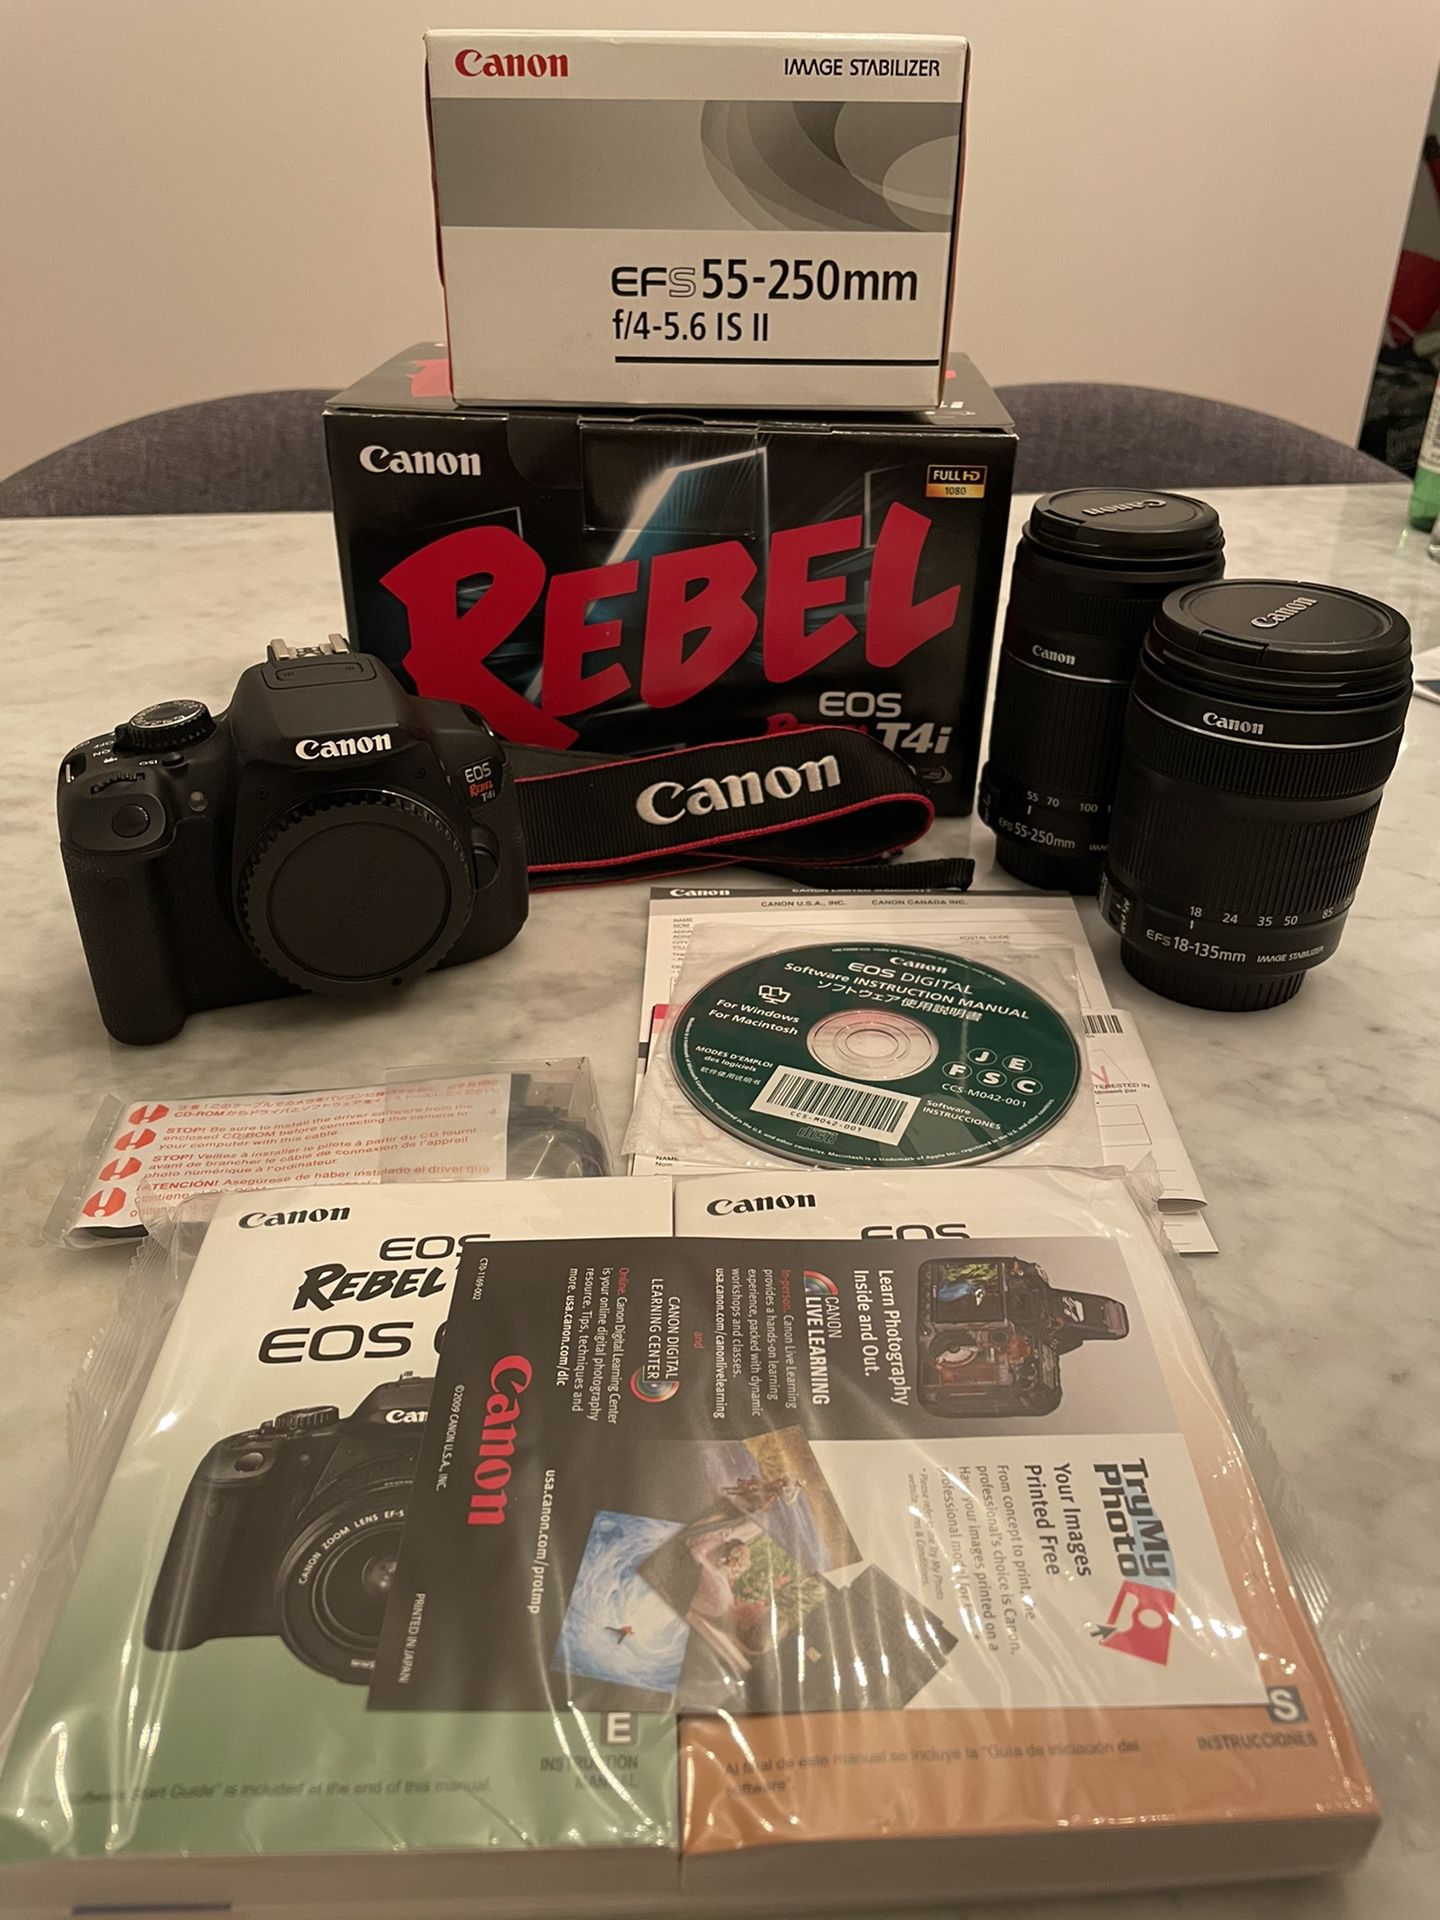 Canon T4i/EOS 650D DSLR with 18-135 and 55-250 lens